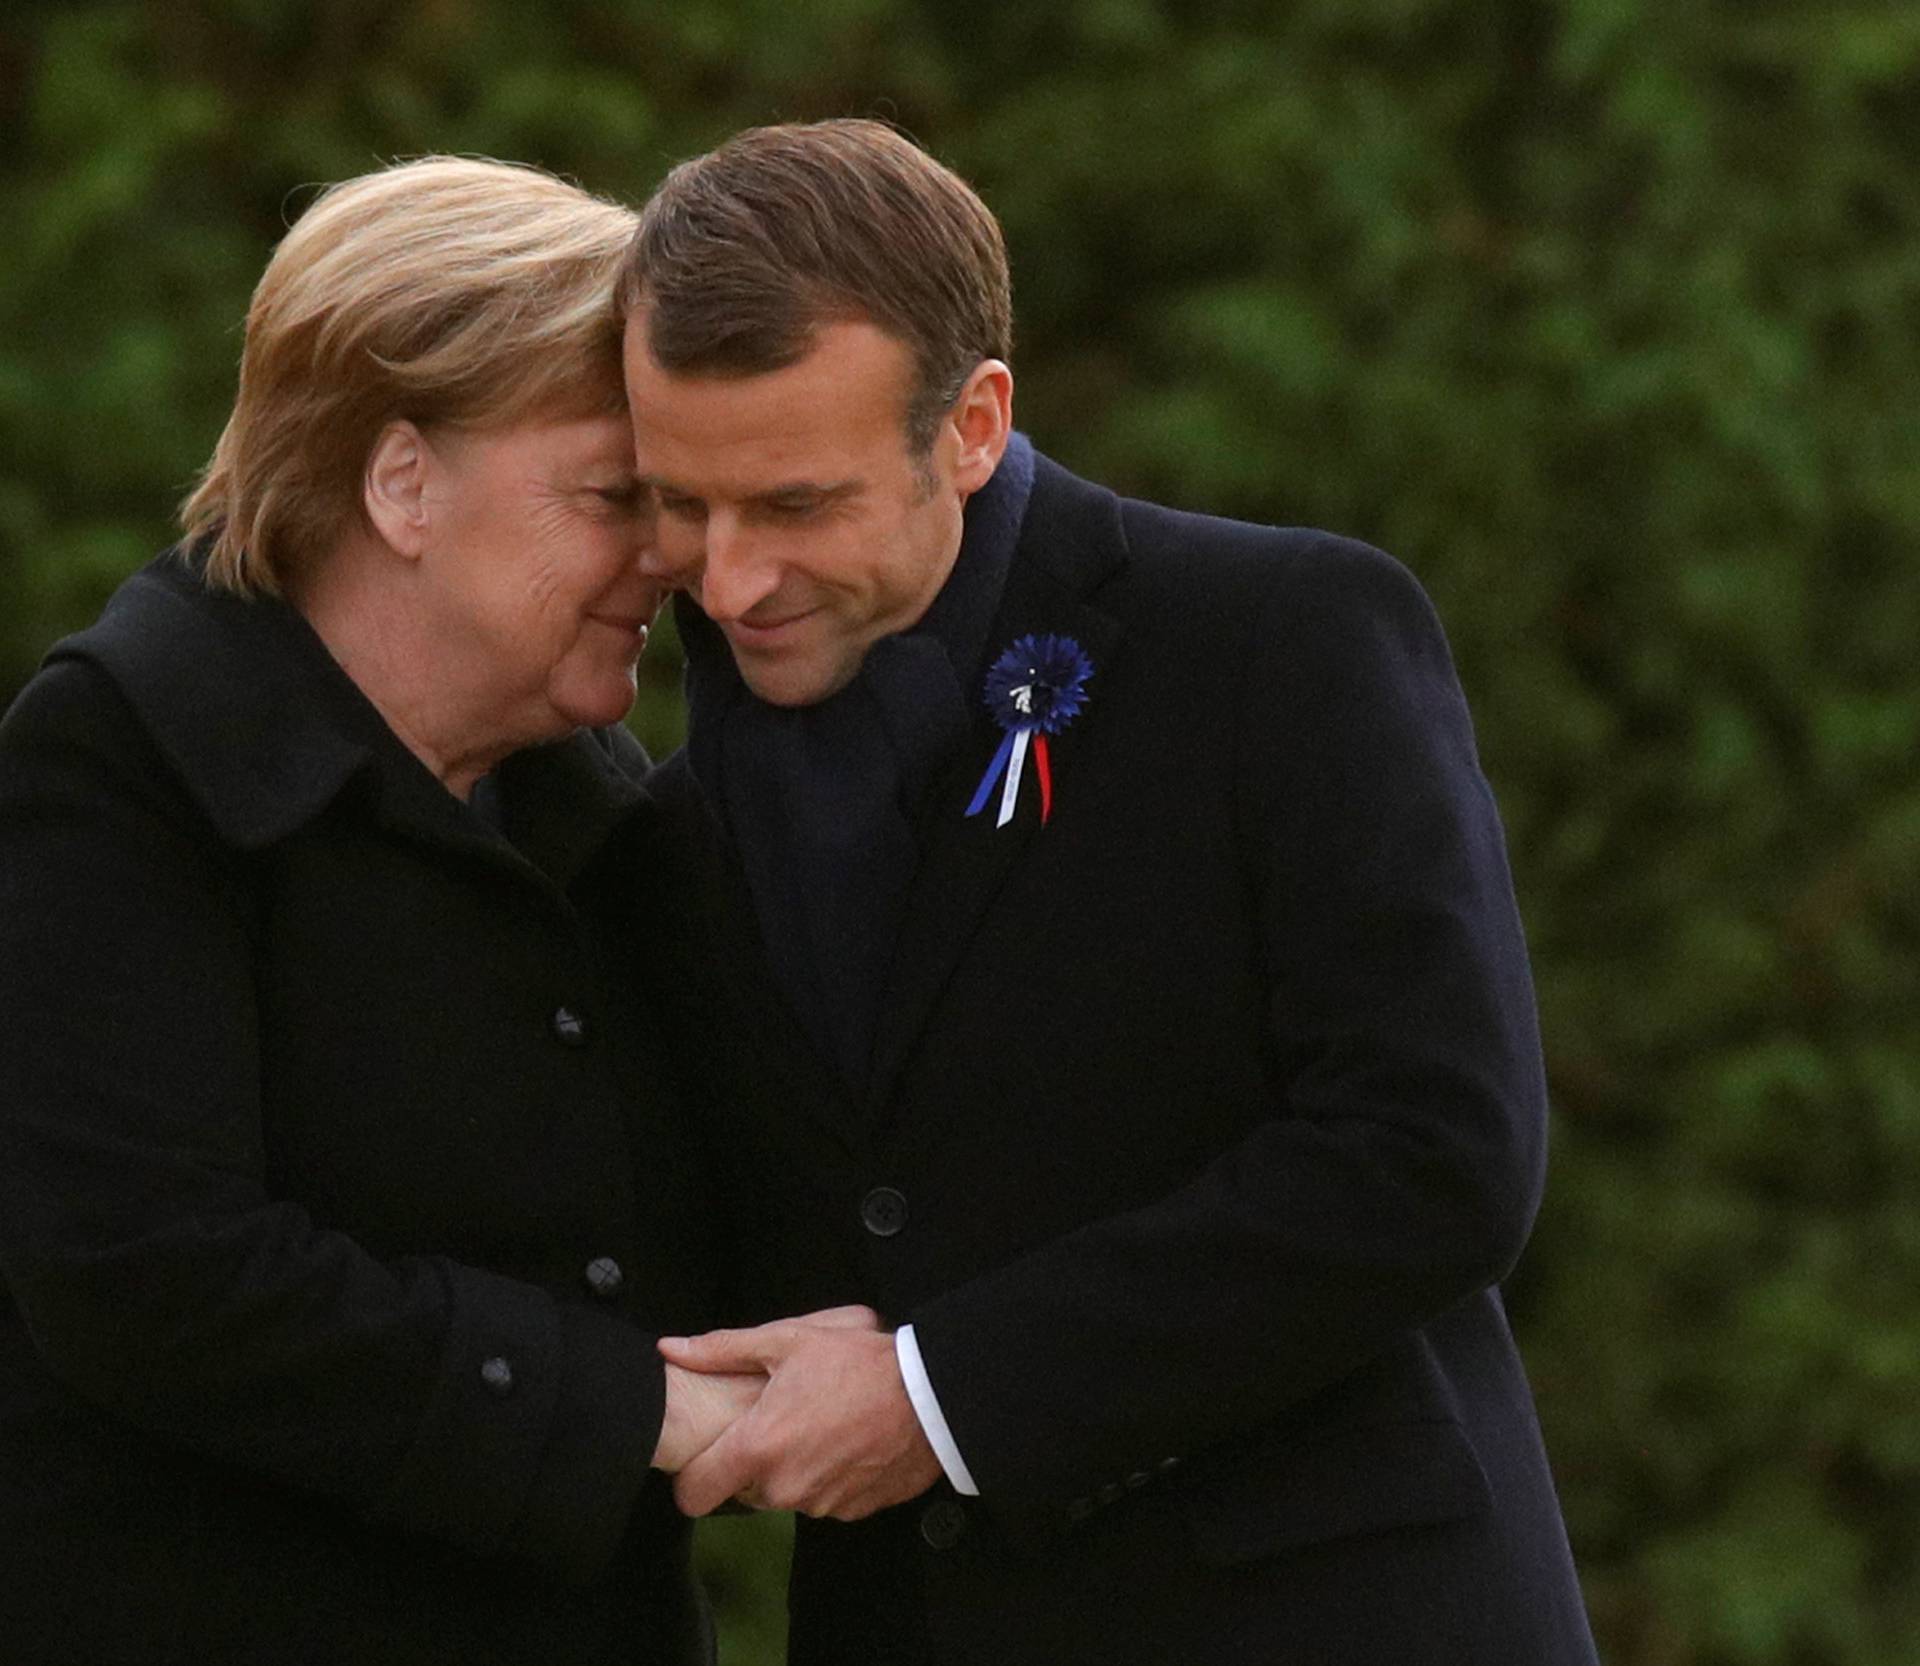 French President Emmanuel Macron and German Chancellor Angela Merkel hug after unveiling a plaque in the Clairiere of Rethondes during a commemoration ceremony for Armistice Day, 100 years after the end of the First World War, in Compiegne